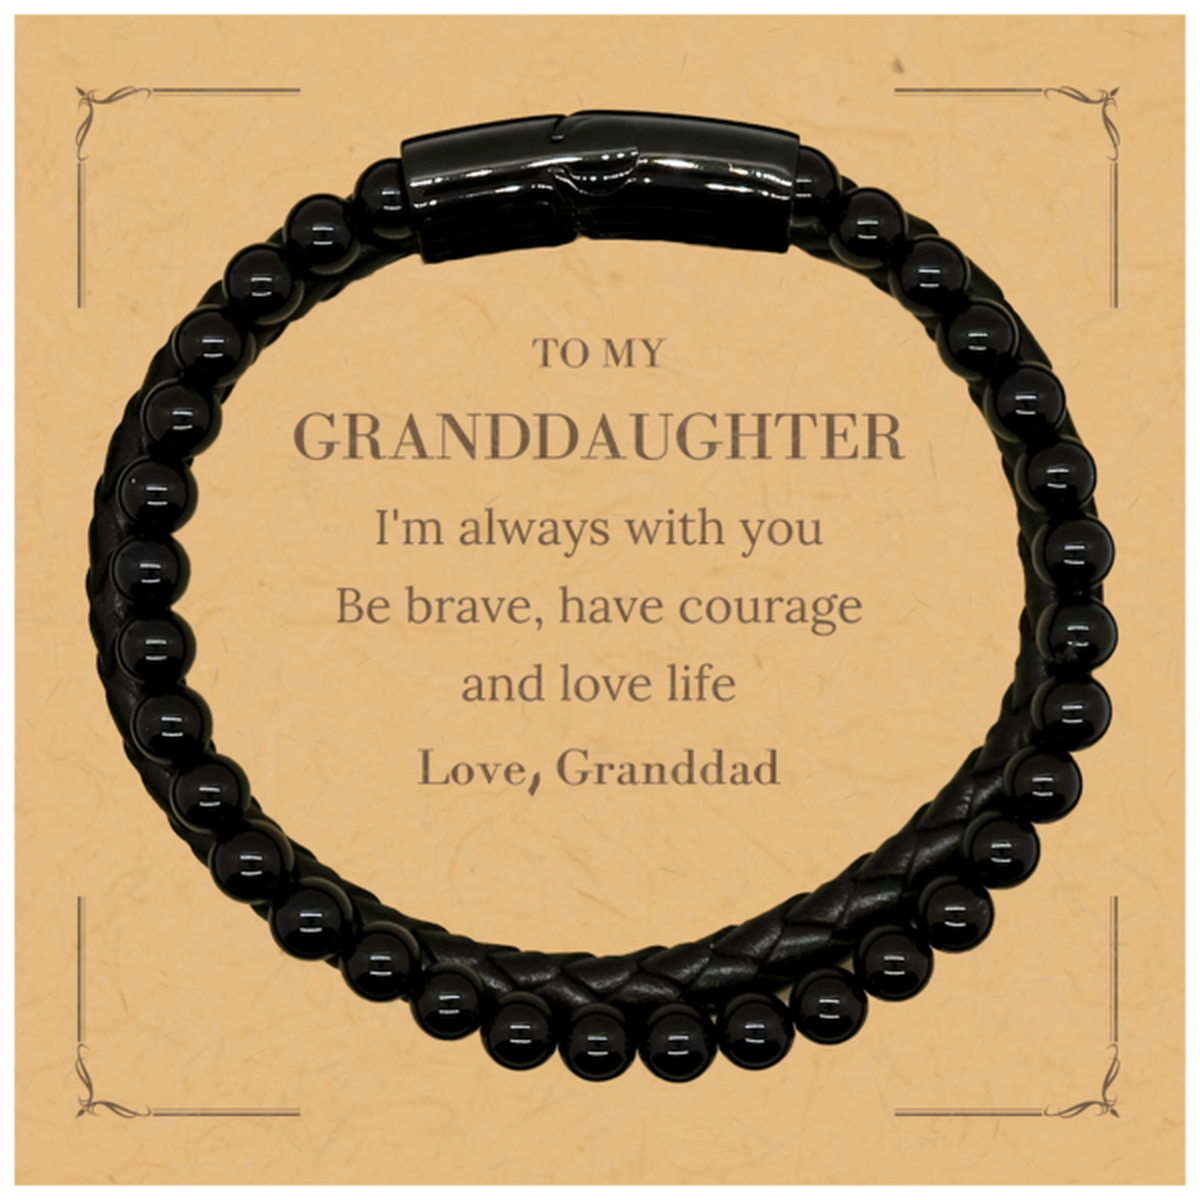 To My Granddaughter Gifts from Granddad, Unique Stone Leather Bracelets Inspirational Christmas Birthday Graduation Gifts for Granddaughter I'm always with you. Be brave, have courage and love life. Love, Granddad